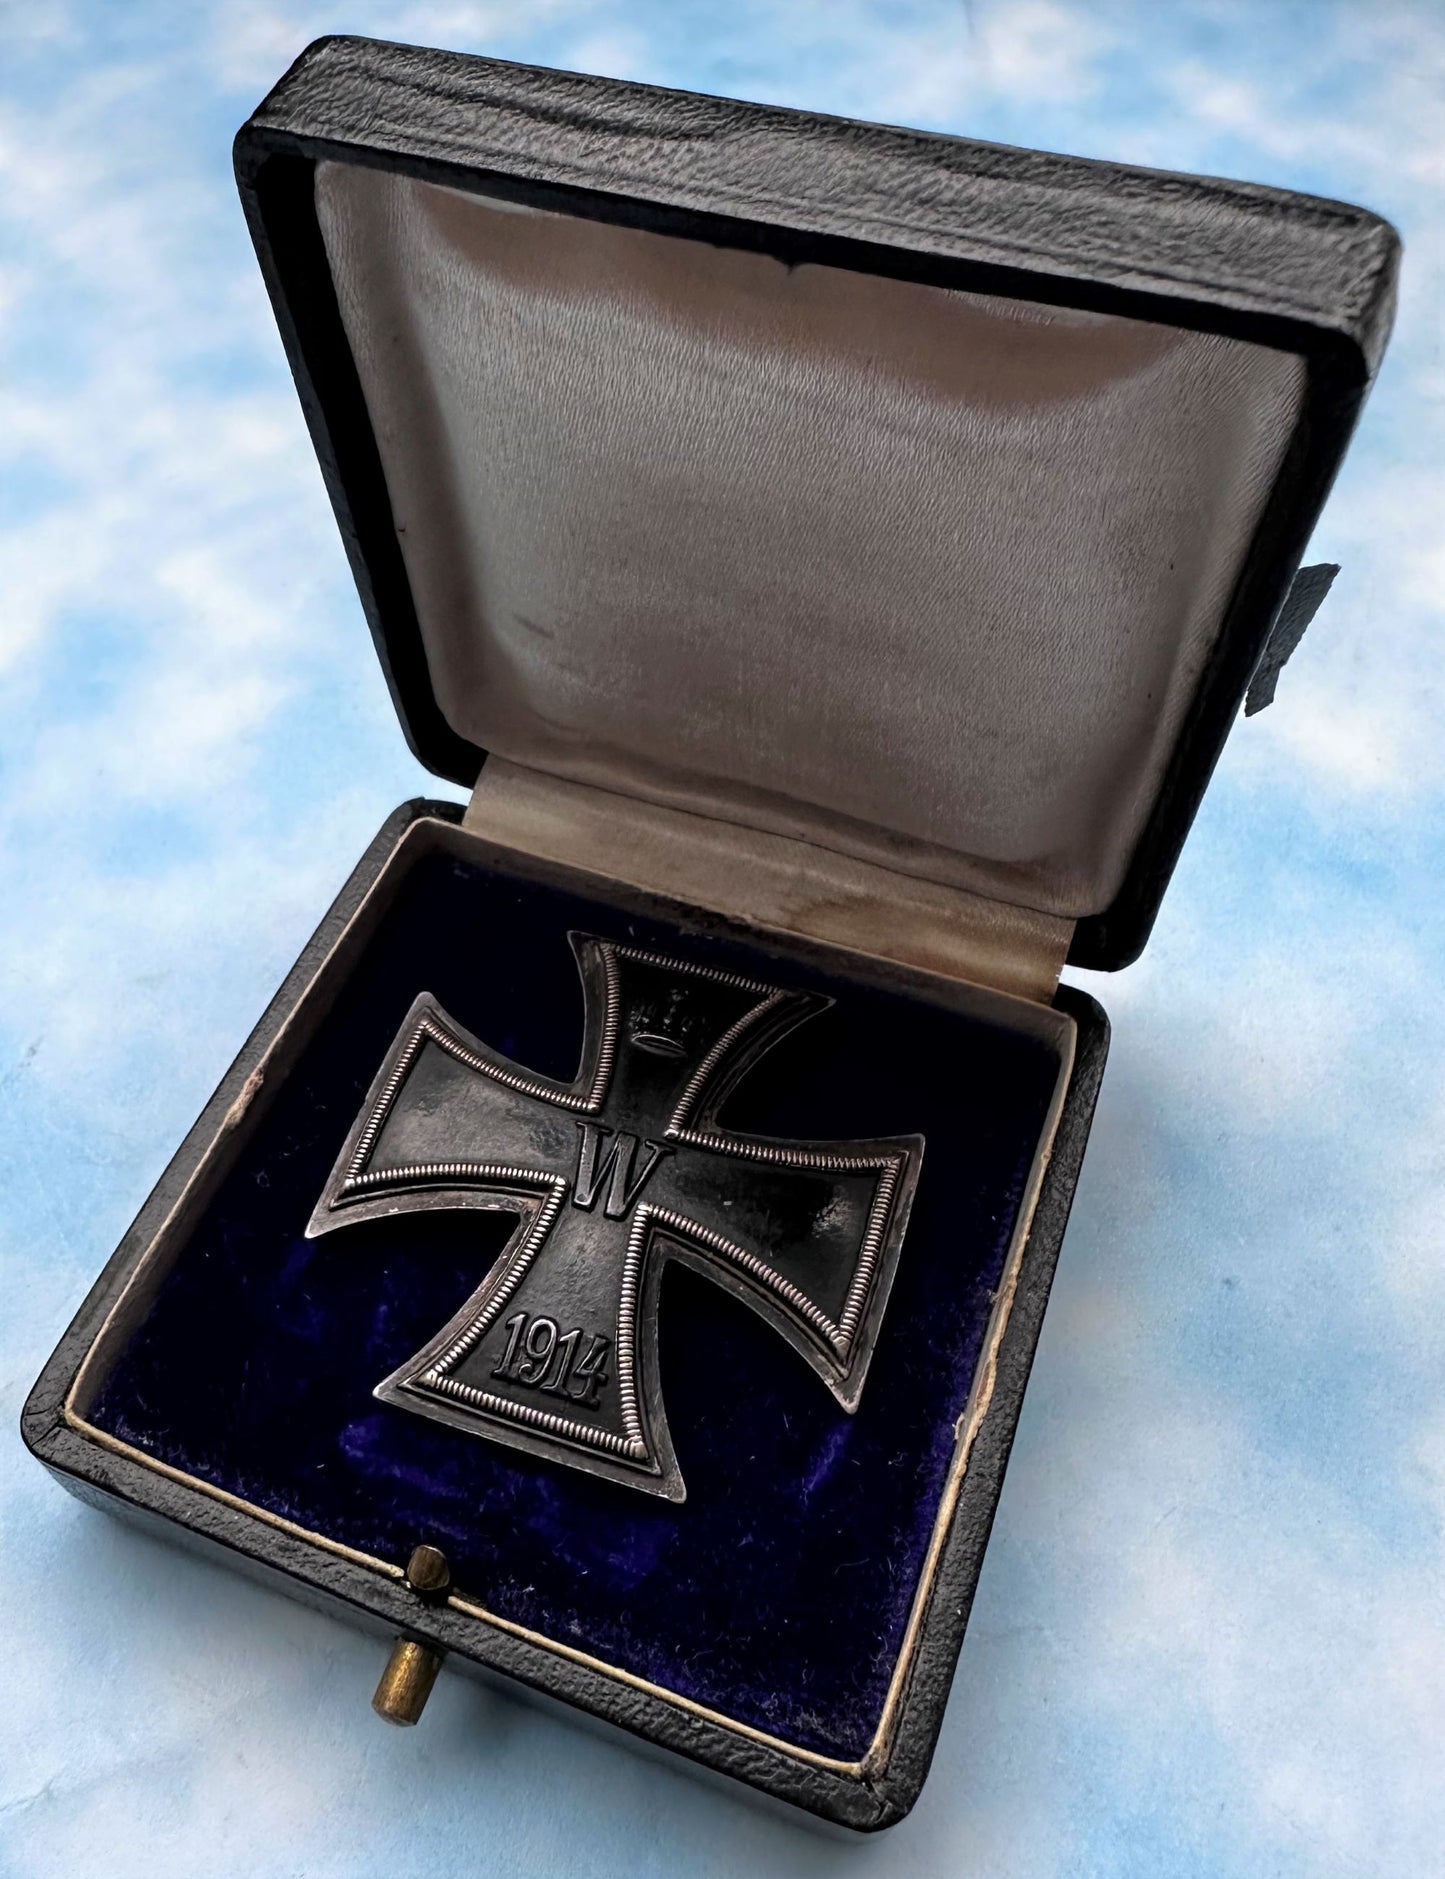 German 1914 Iron Cross 1st Class - Low Vaulted - .800 Silver - in the Original Presentation Case - Derrittmeister Militaria Group